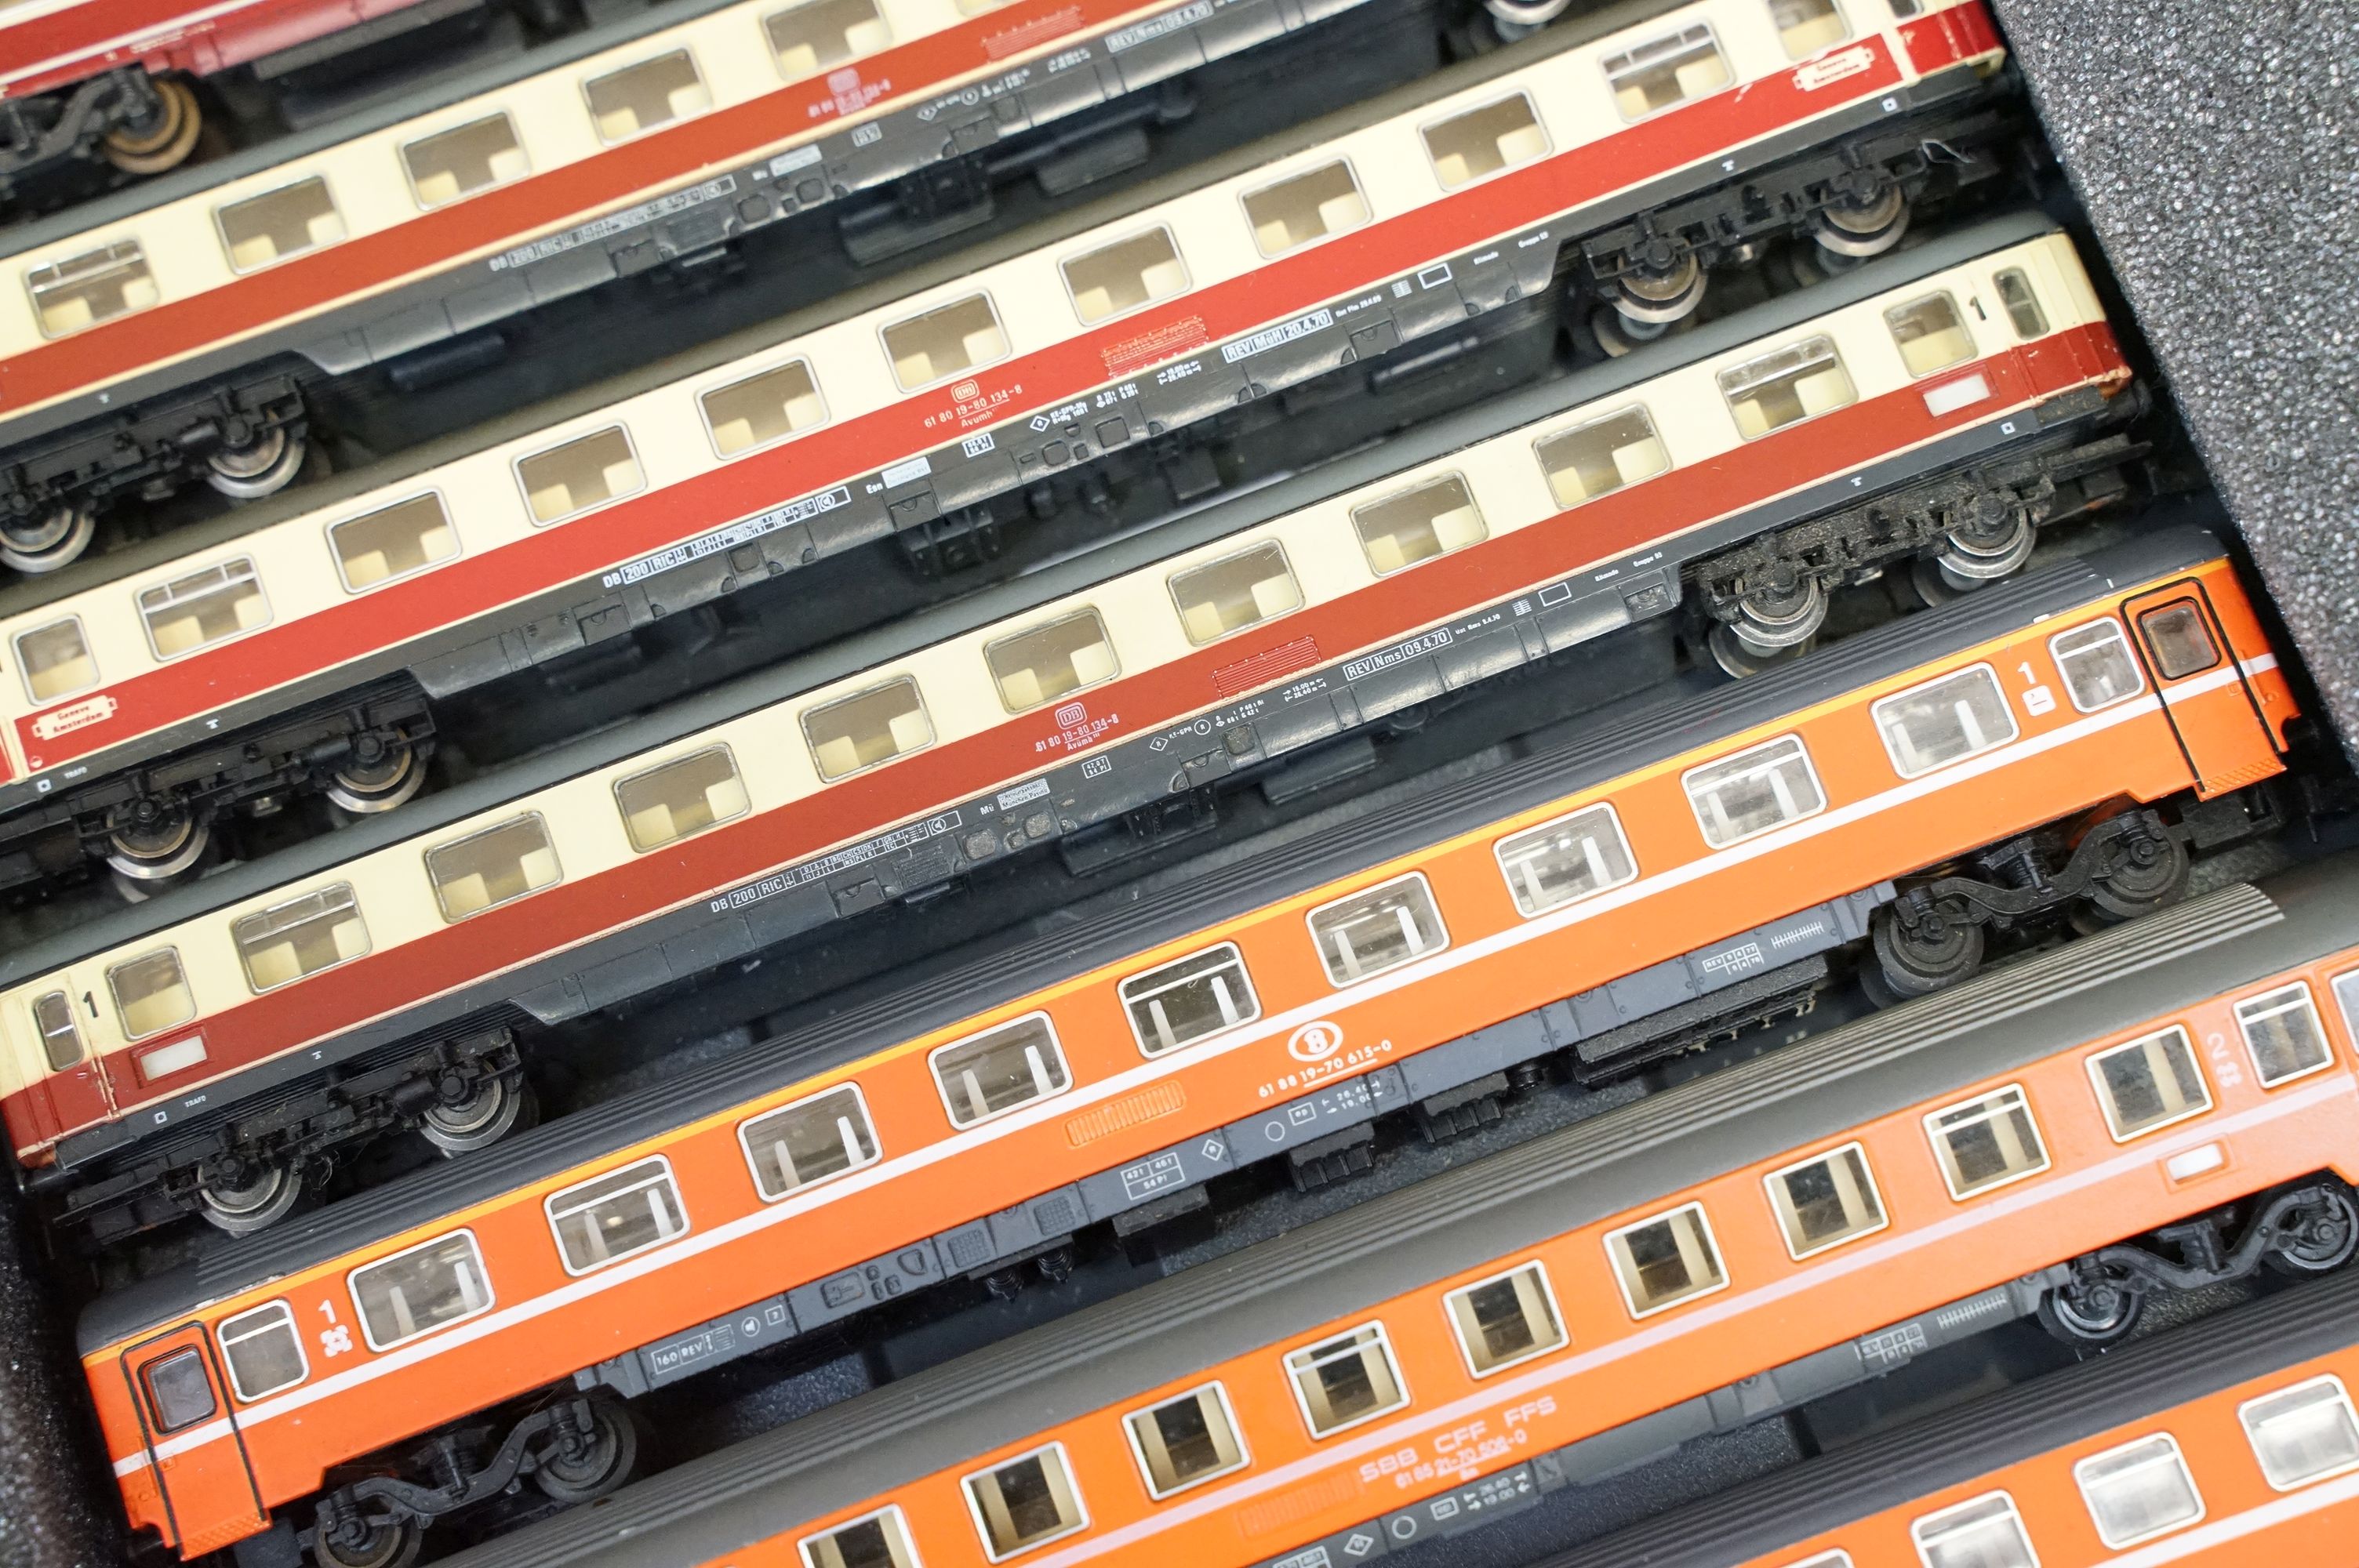 Over 80 N gauge items of rolling stock to include coaches, vans and wagons featuring Minitrix, Roco, - Image 8 of 8